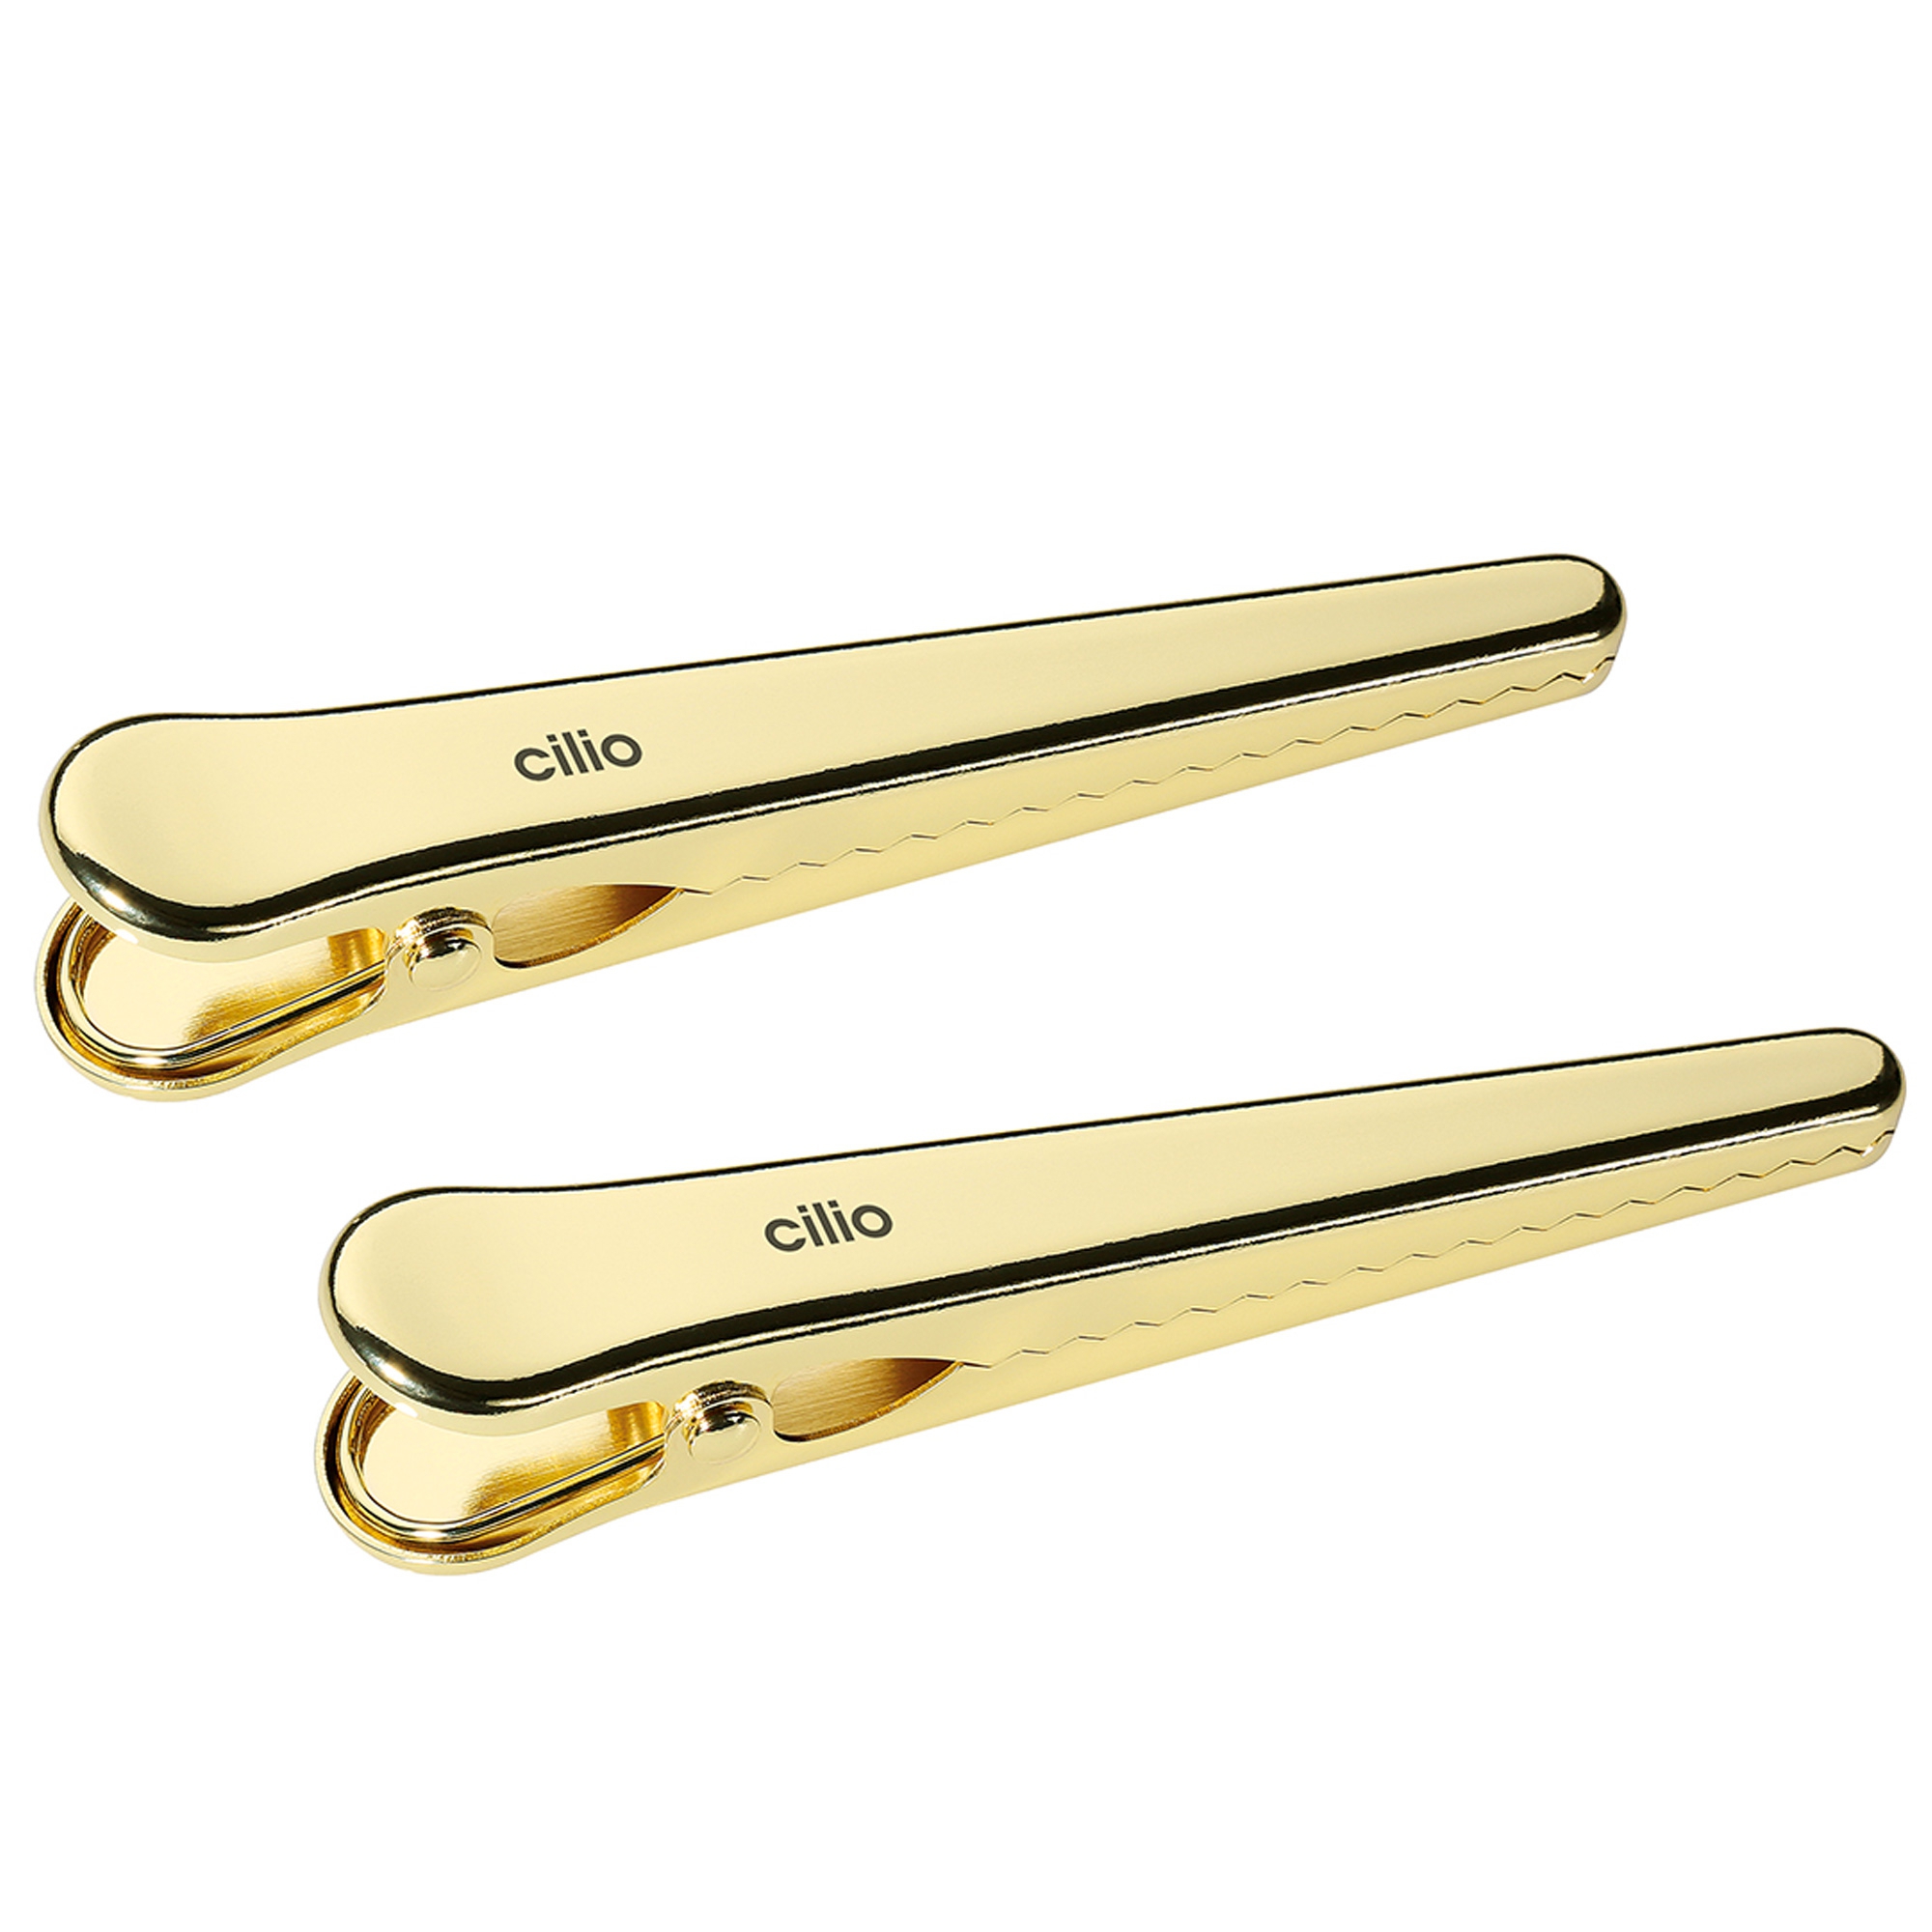 cilio - Coffee bag clips set of 2 - Gold